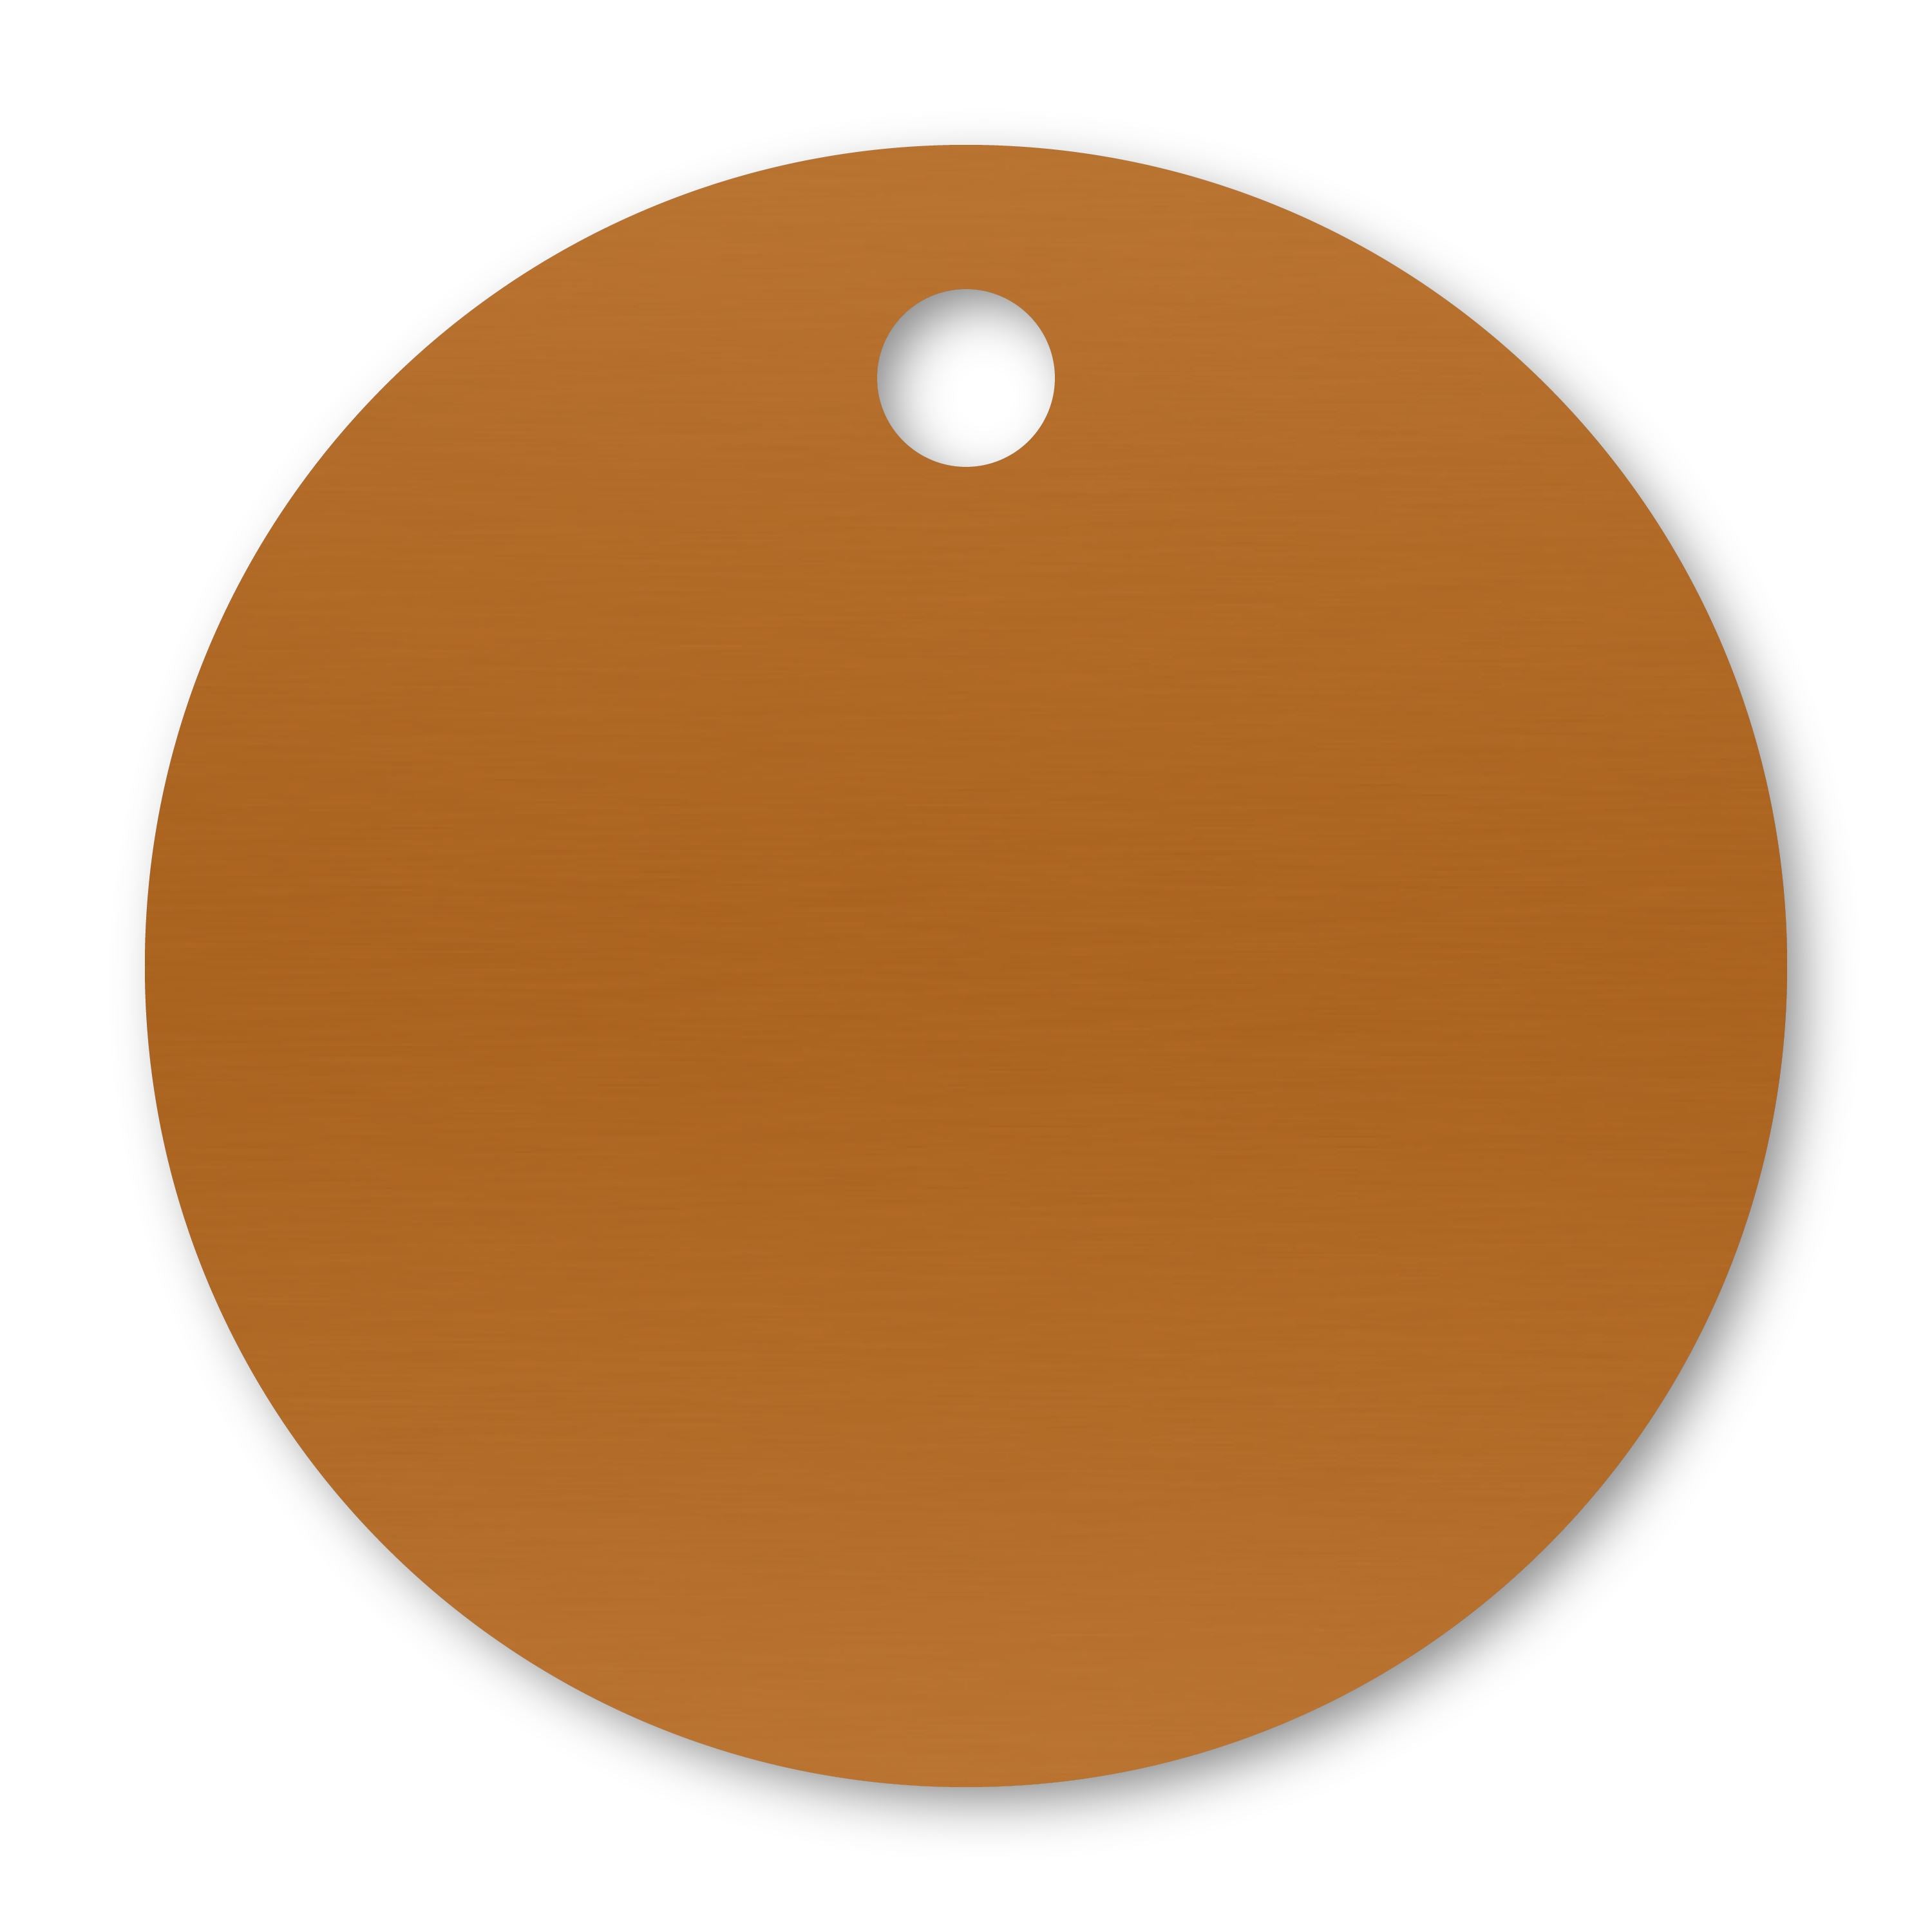 Anodized Aluminum Round Tags, 1-1/8" with 1/8" Hole, Laser Engraved Metal Tags Craftworks NW Orange 